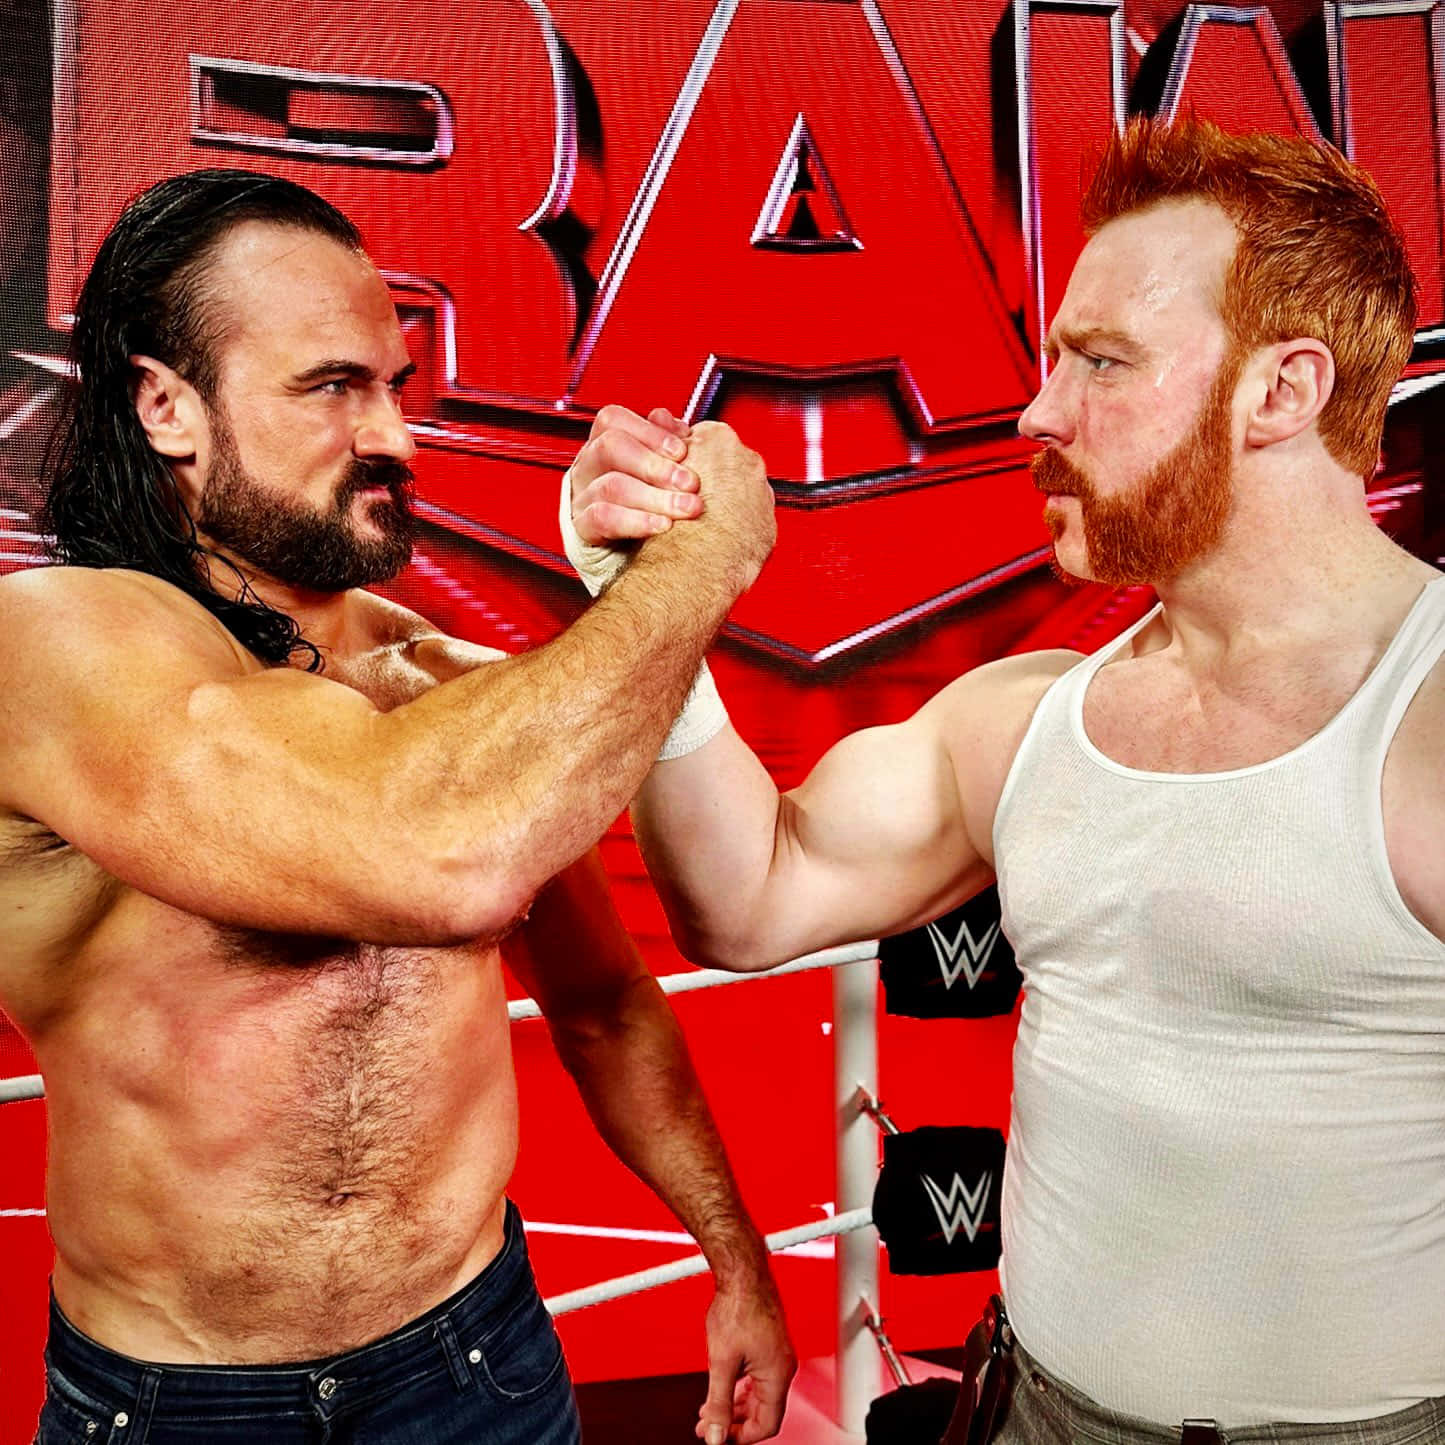 WWE wrestlers Drew McIntyre and Sheamus in a powerful team up. Wallpaper